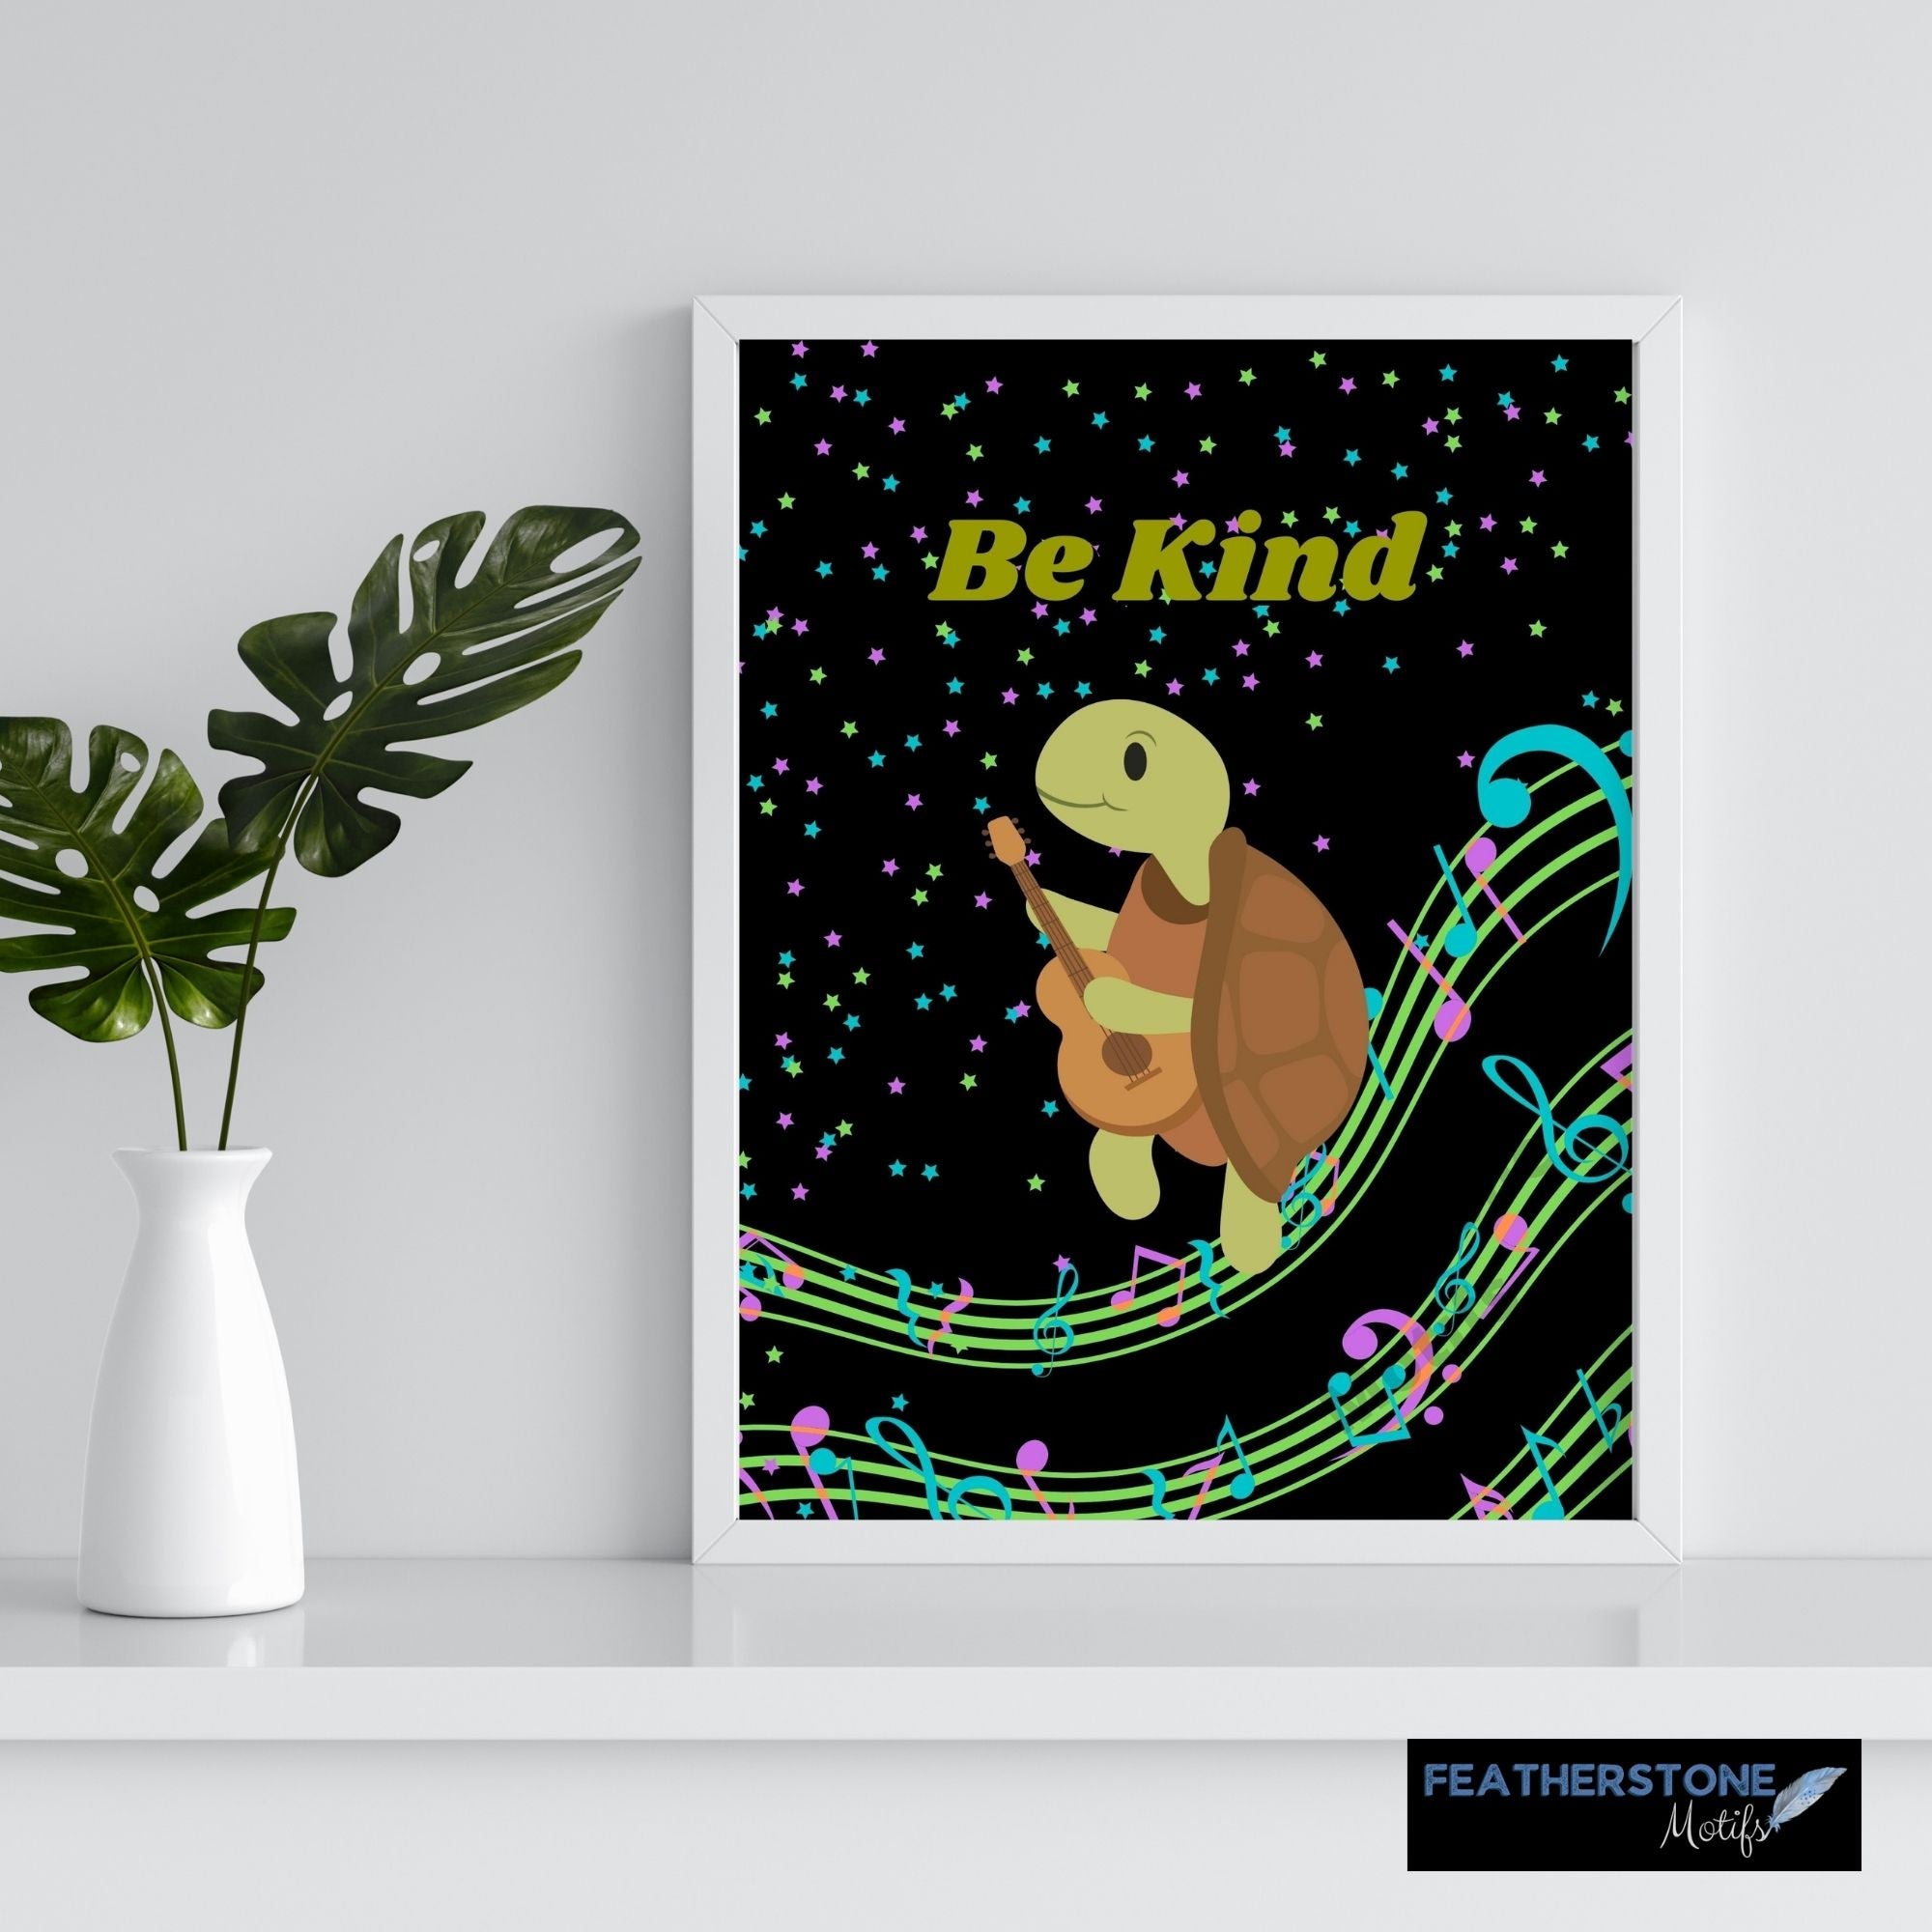 The Be YOU! digital download features 8 designs in 5 different colors for a total of 40 different images! Each image has an animal - lion, hippo, cow, turtle, giraffe, rino, fox, and elephant - playing a musical instrument with an inspirational message to "Be" joyful, brave, peaceful, kind, adorable, awesome, playful, and cute. 